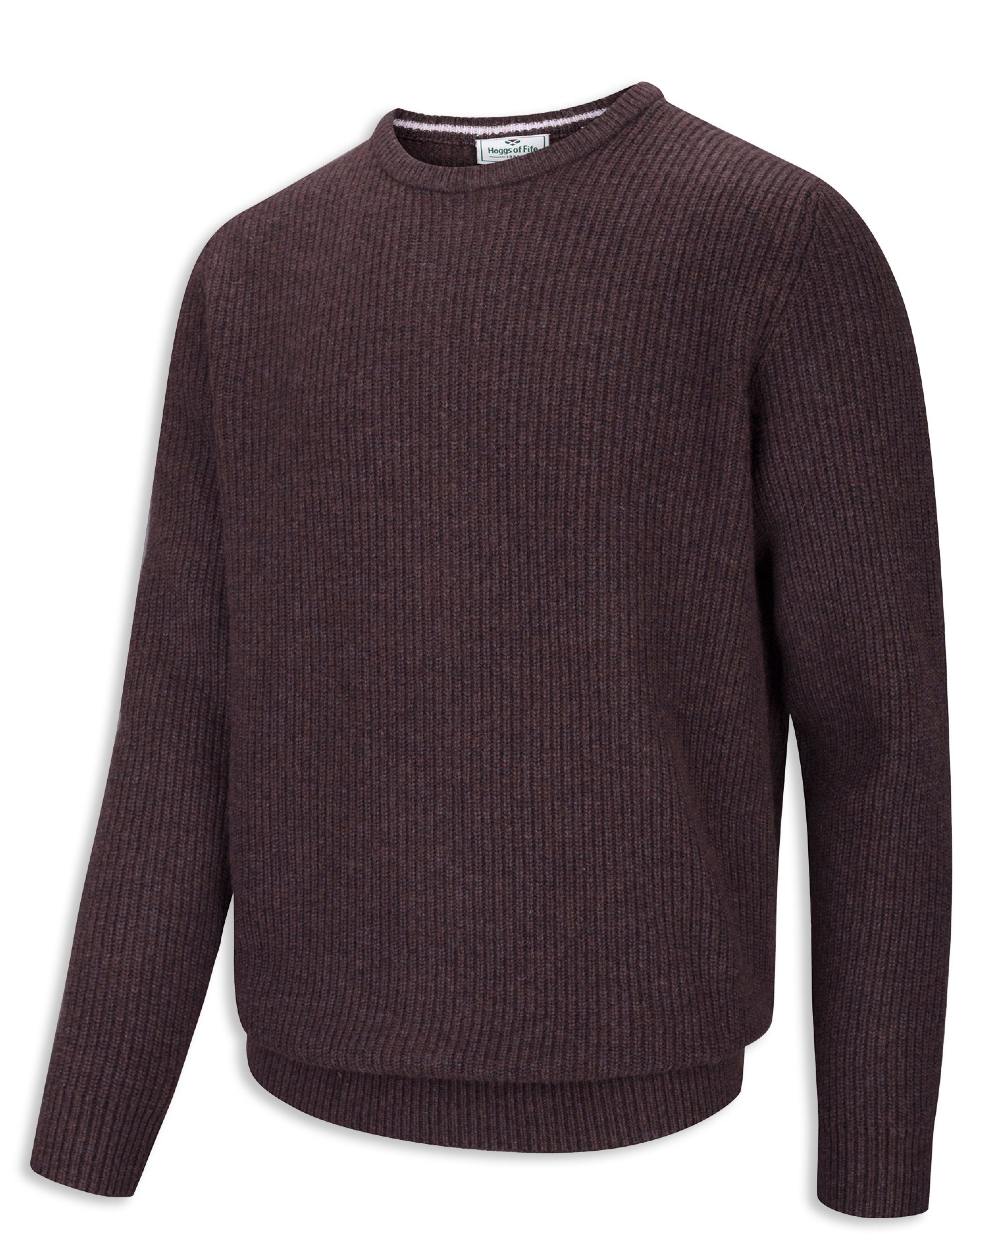 Hoggs of Fife Borders Ribbed Knit Pullover in Redwood 